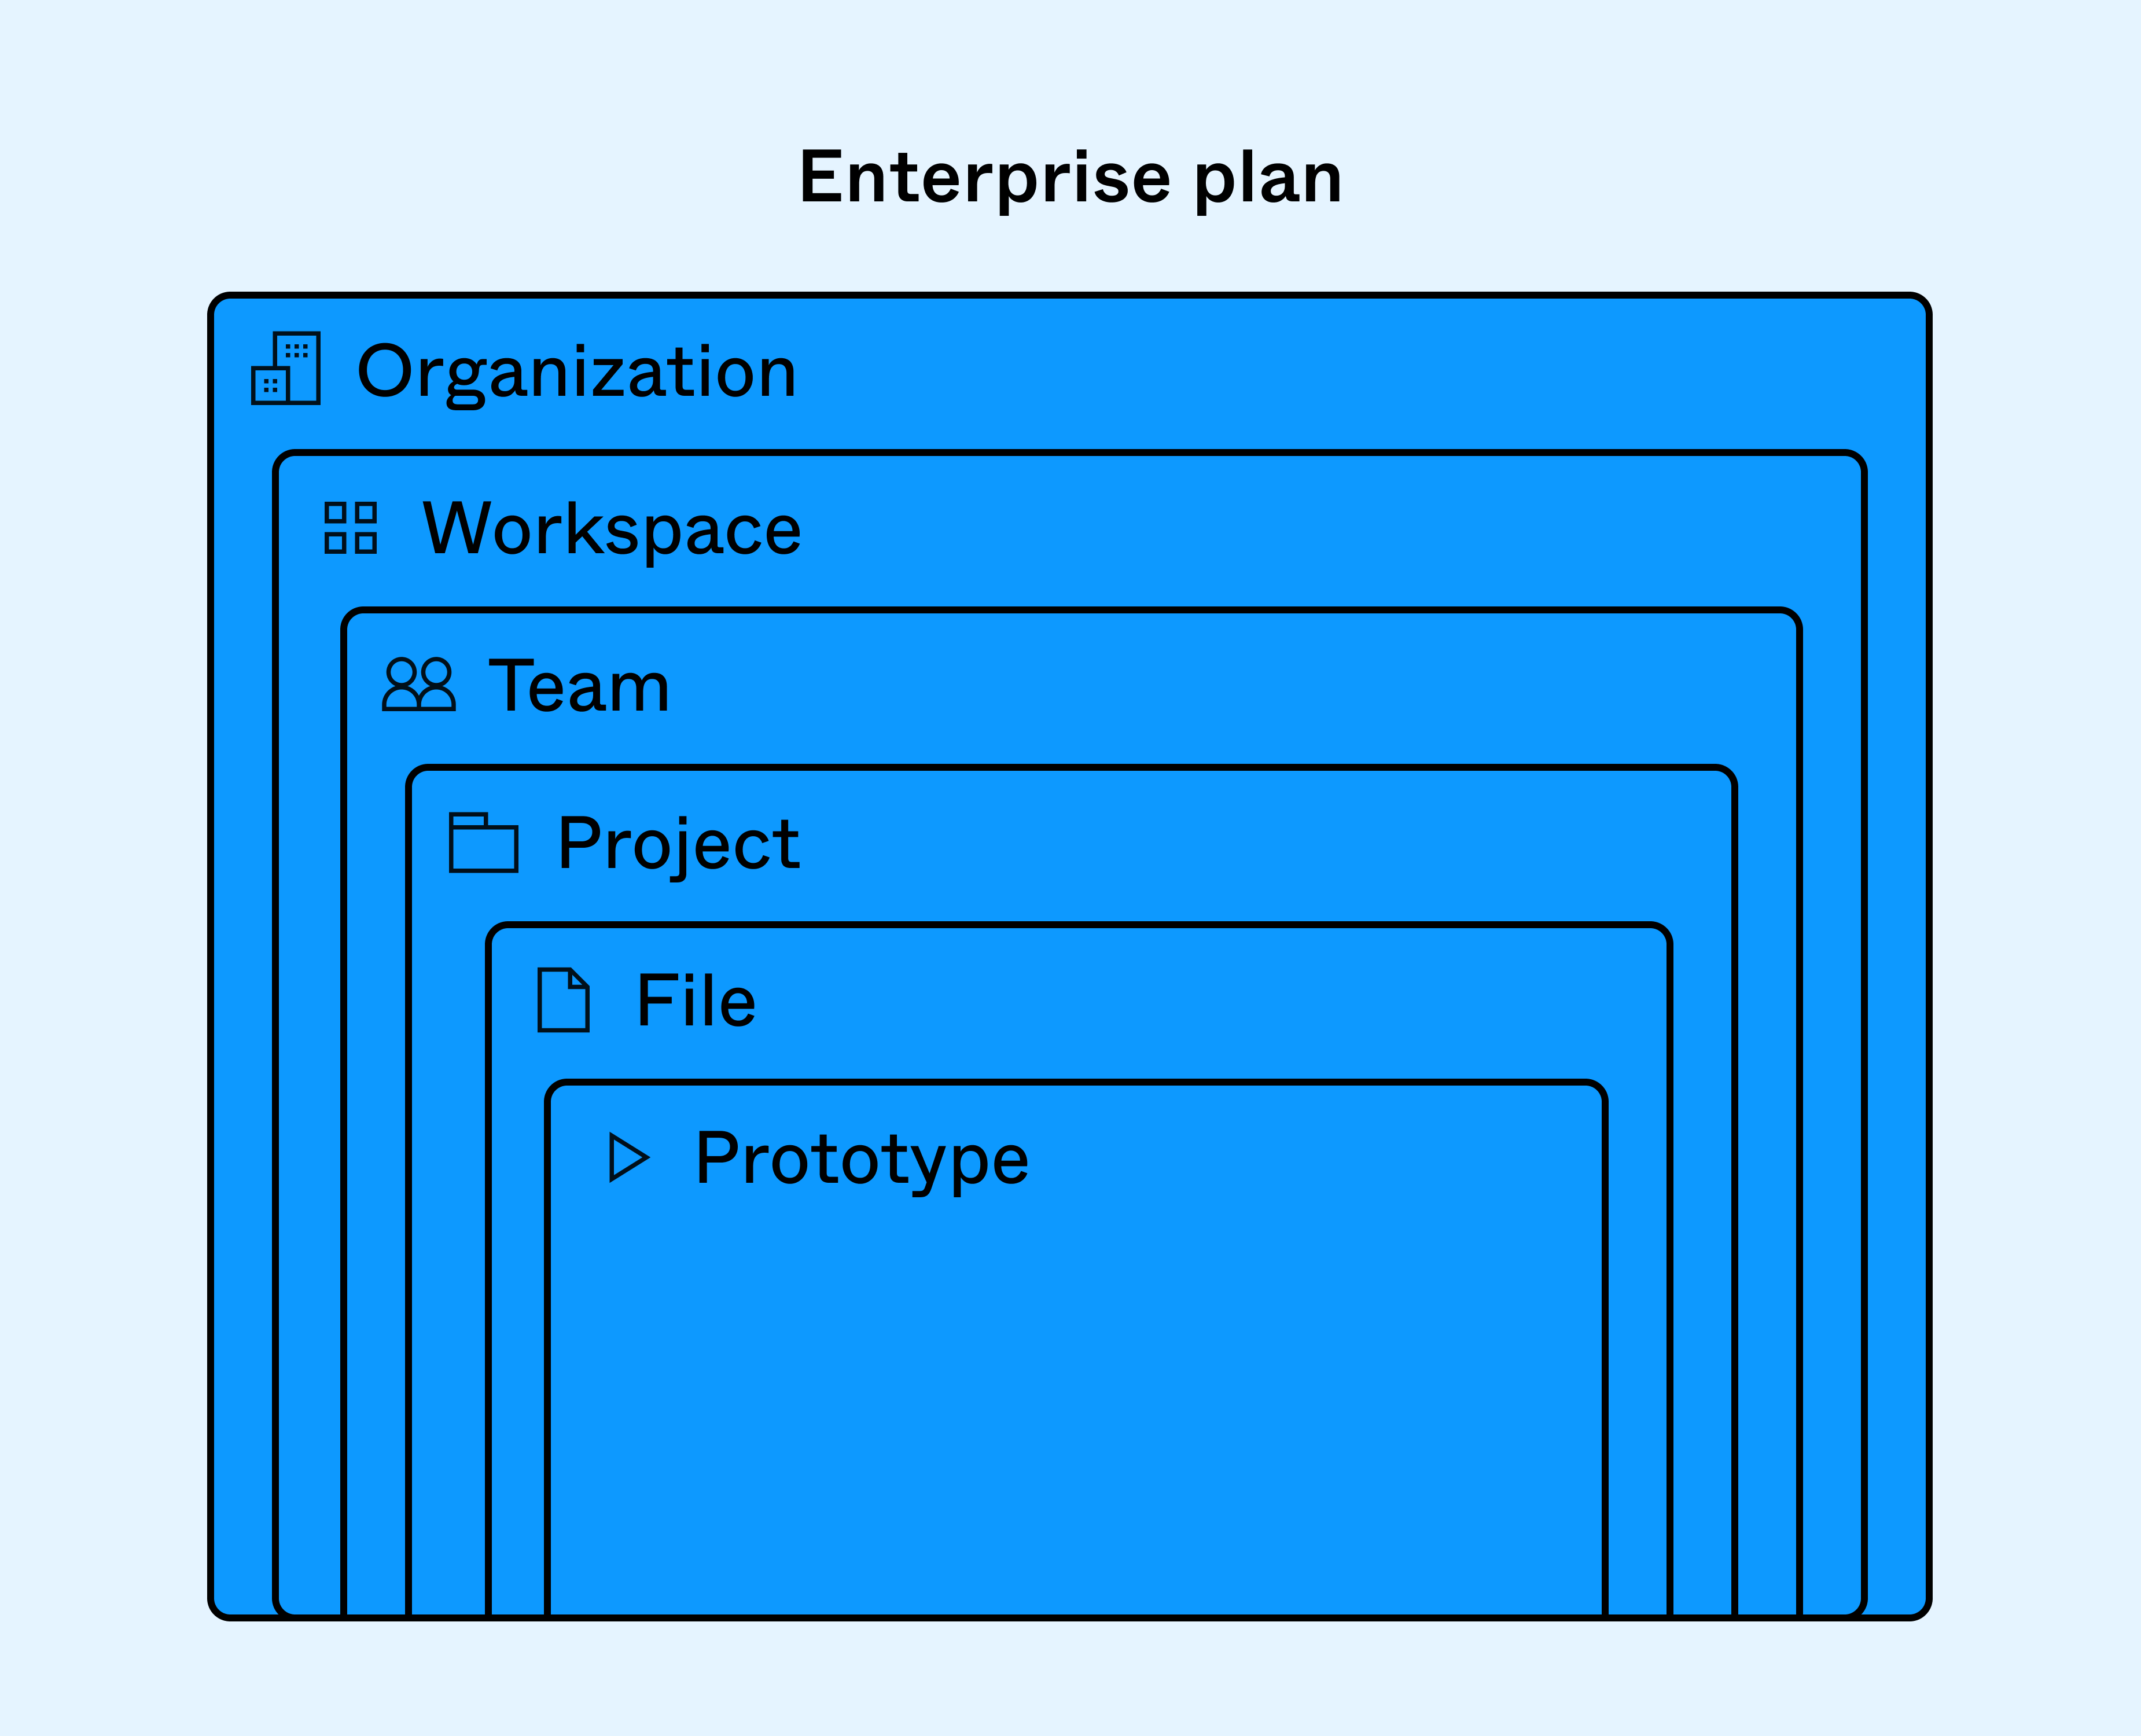 Share the organization, teams, projects, files, and prototypes and assign people to workspaces on the Enterprise plan